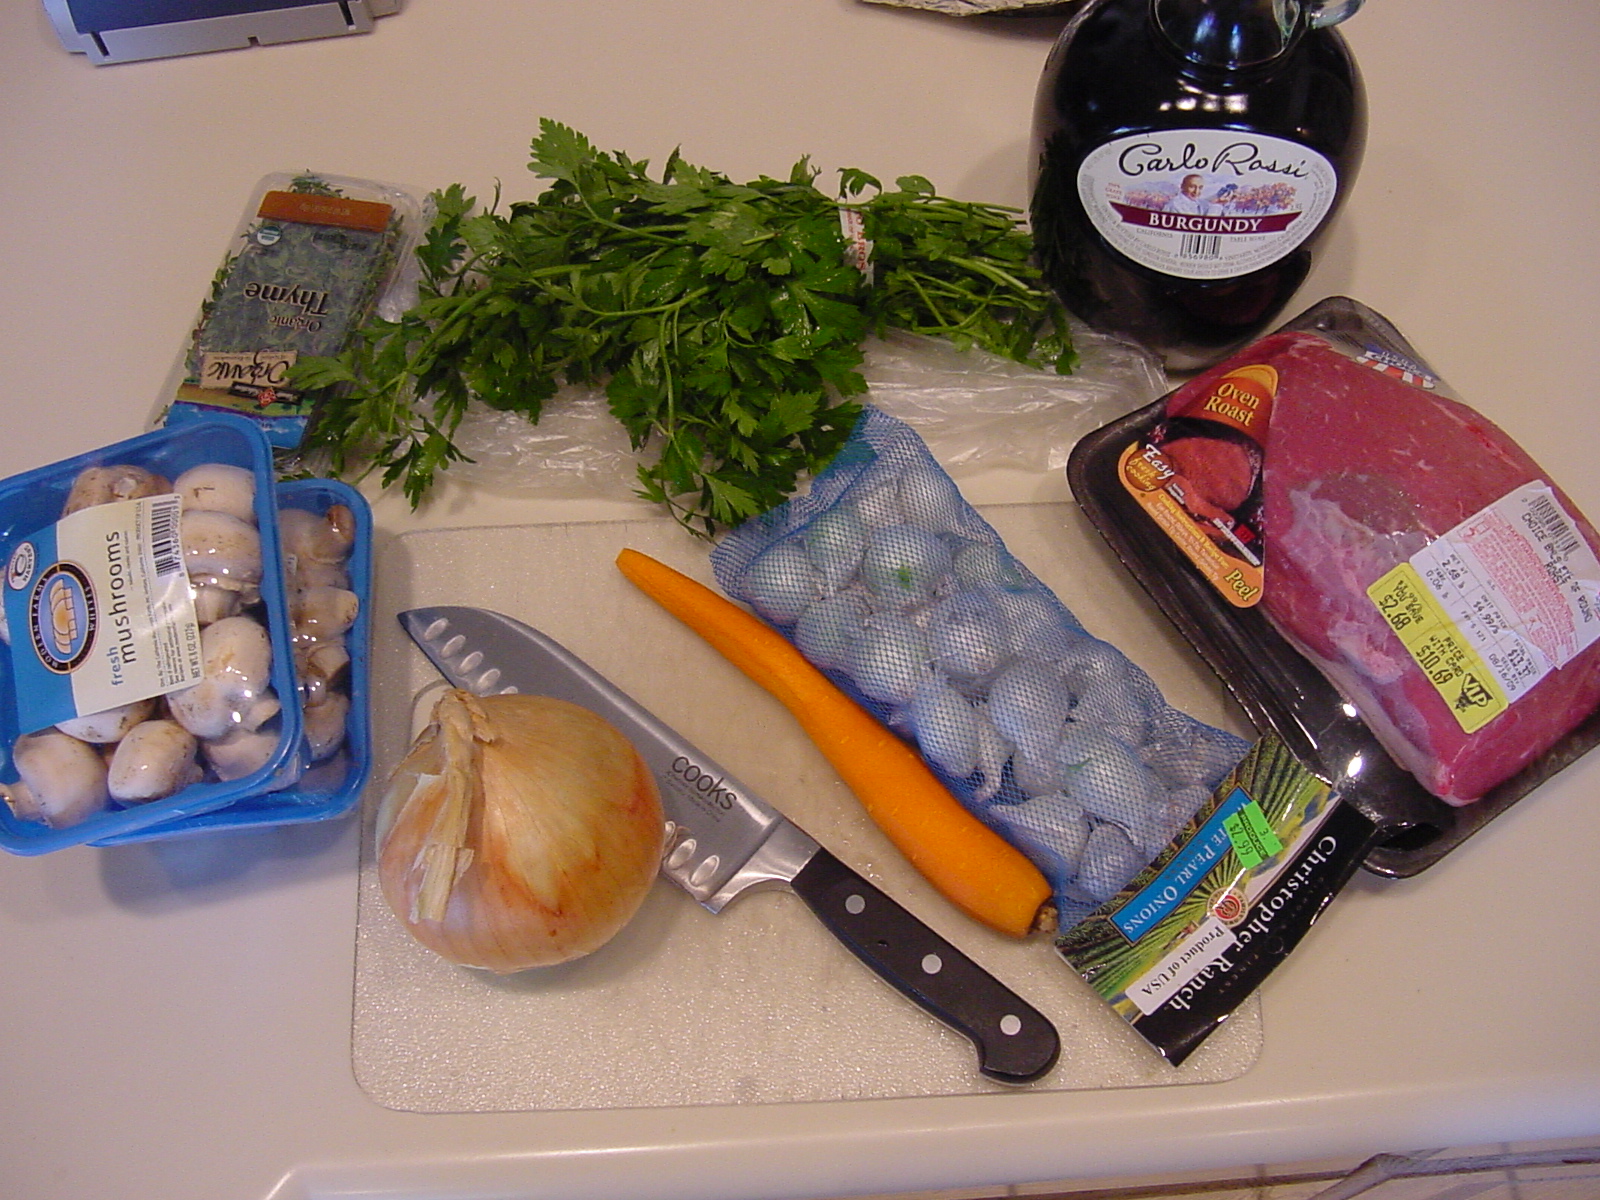 Assembling the Ingredients